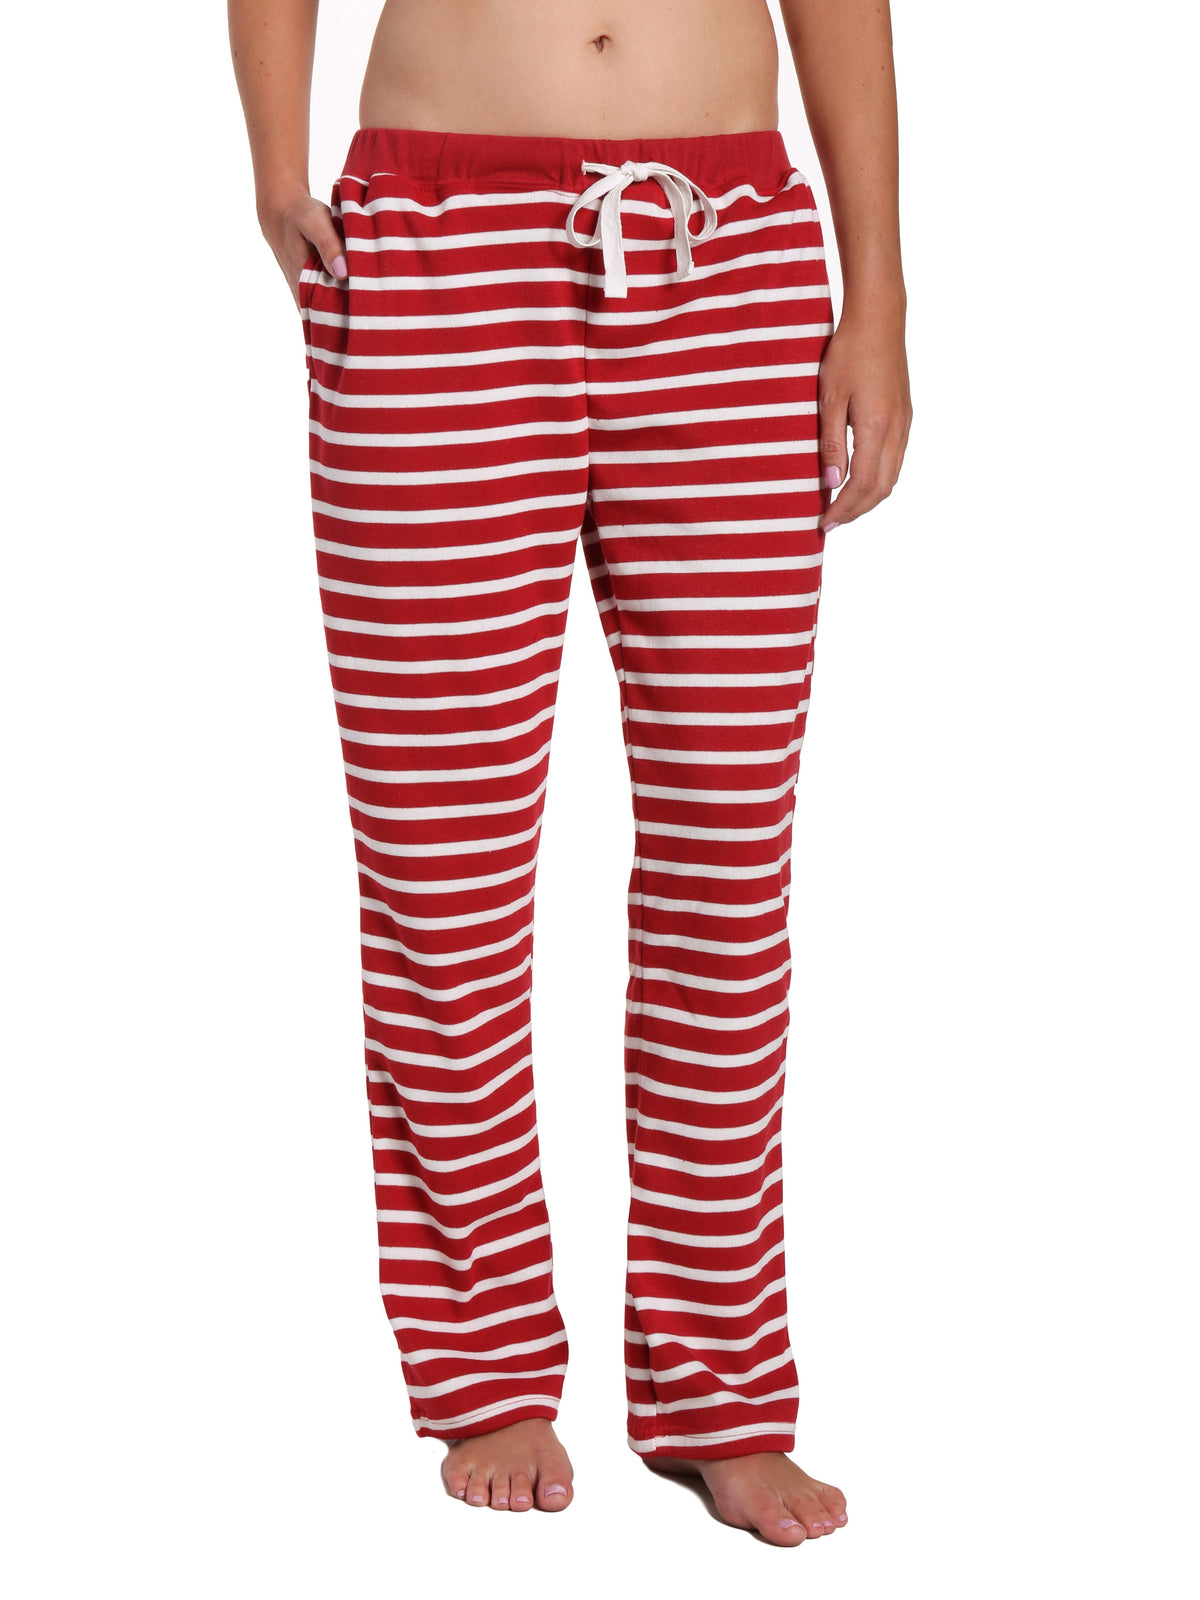 Womens Towel Brushed Sweatpants - Stripes Red White